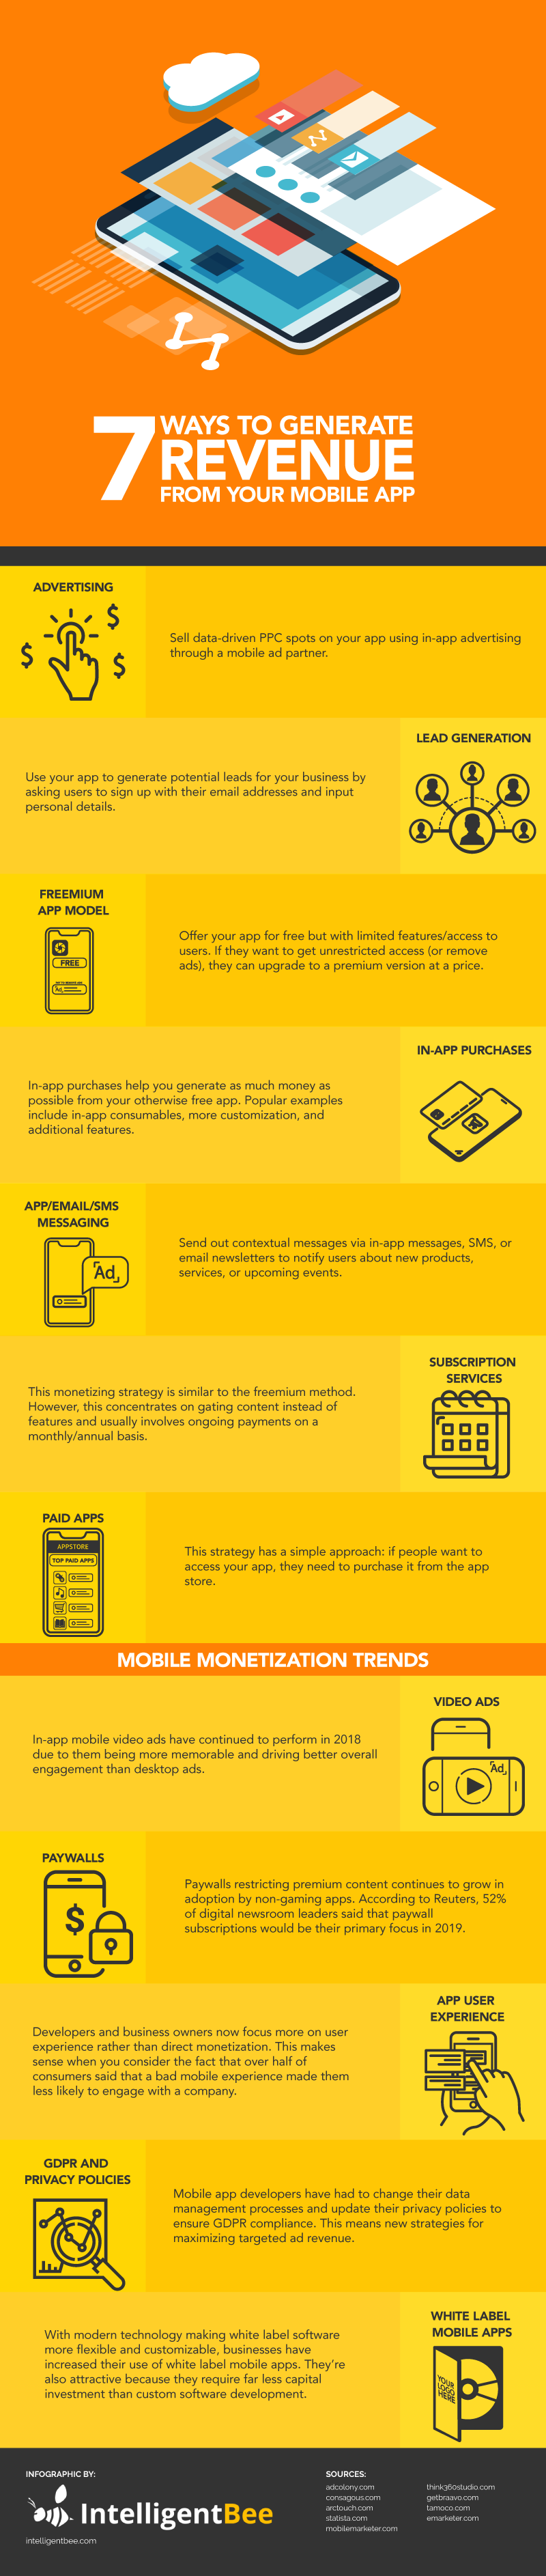 Generate-Revenue-from-Mobile-App-Infographic